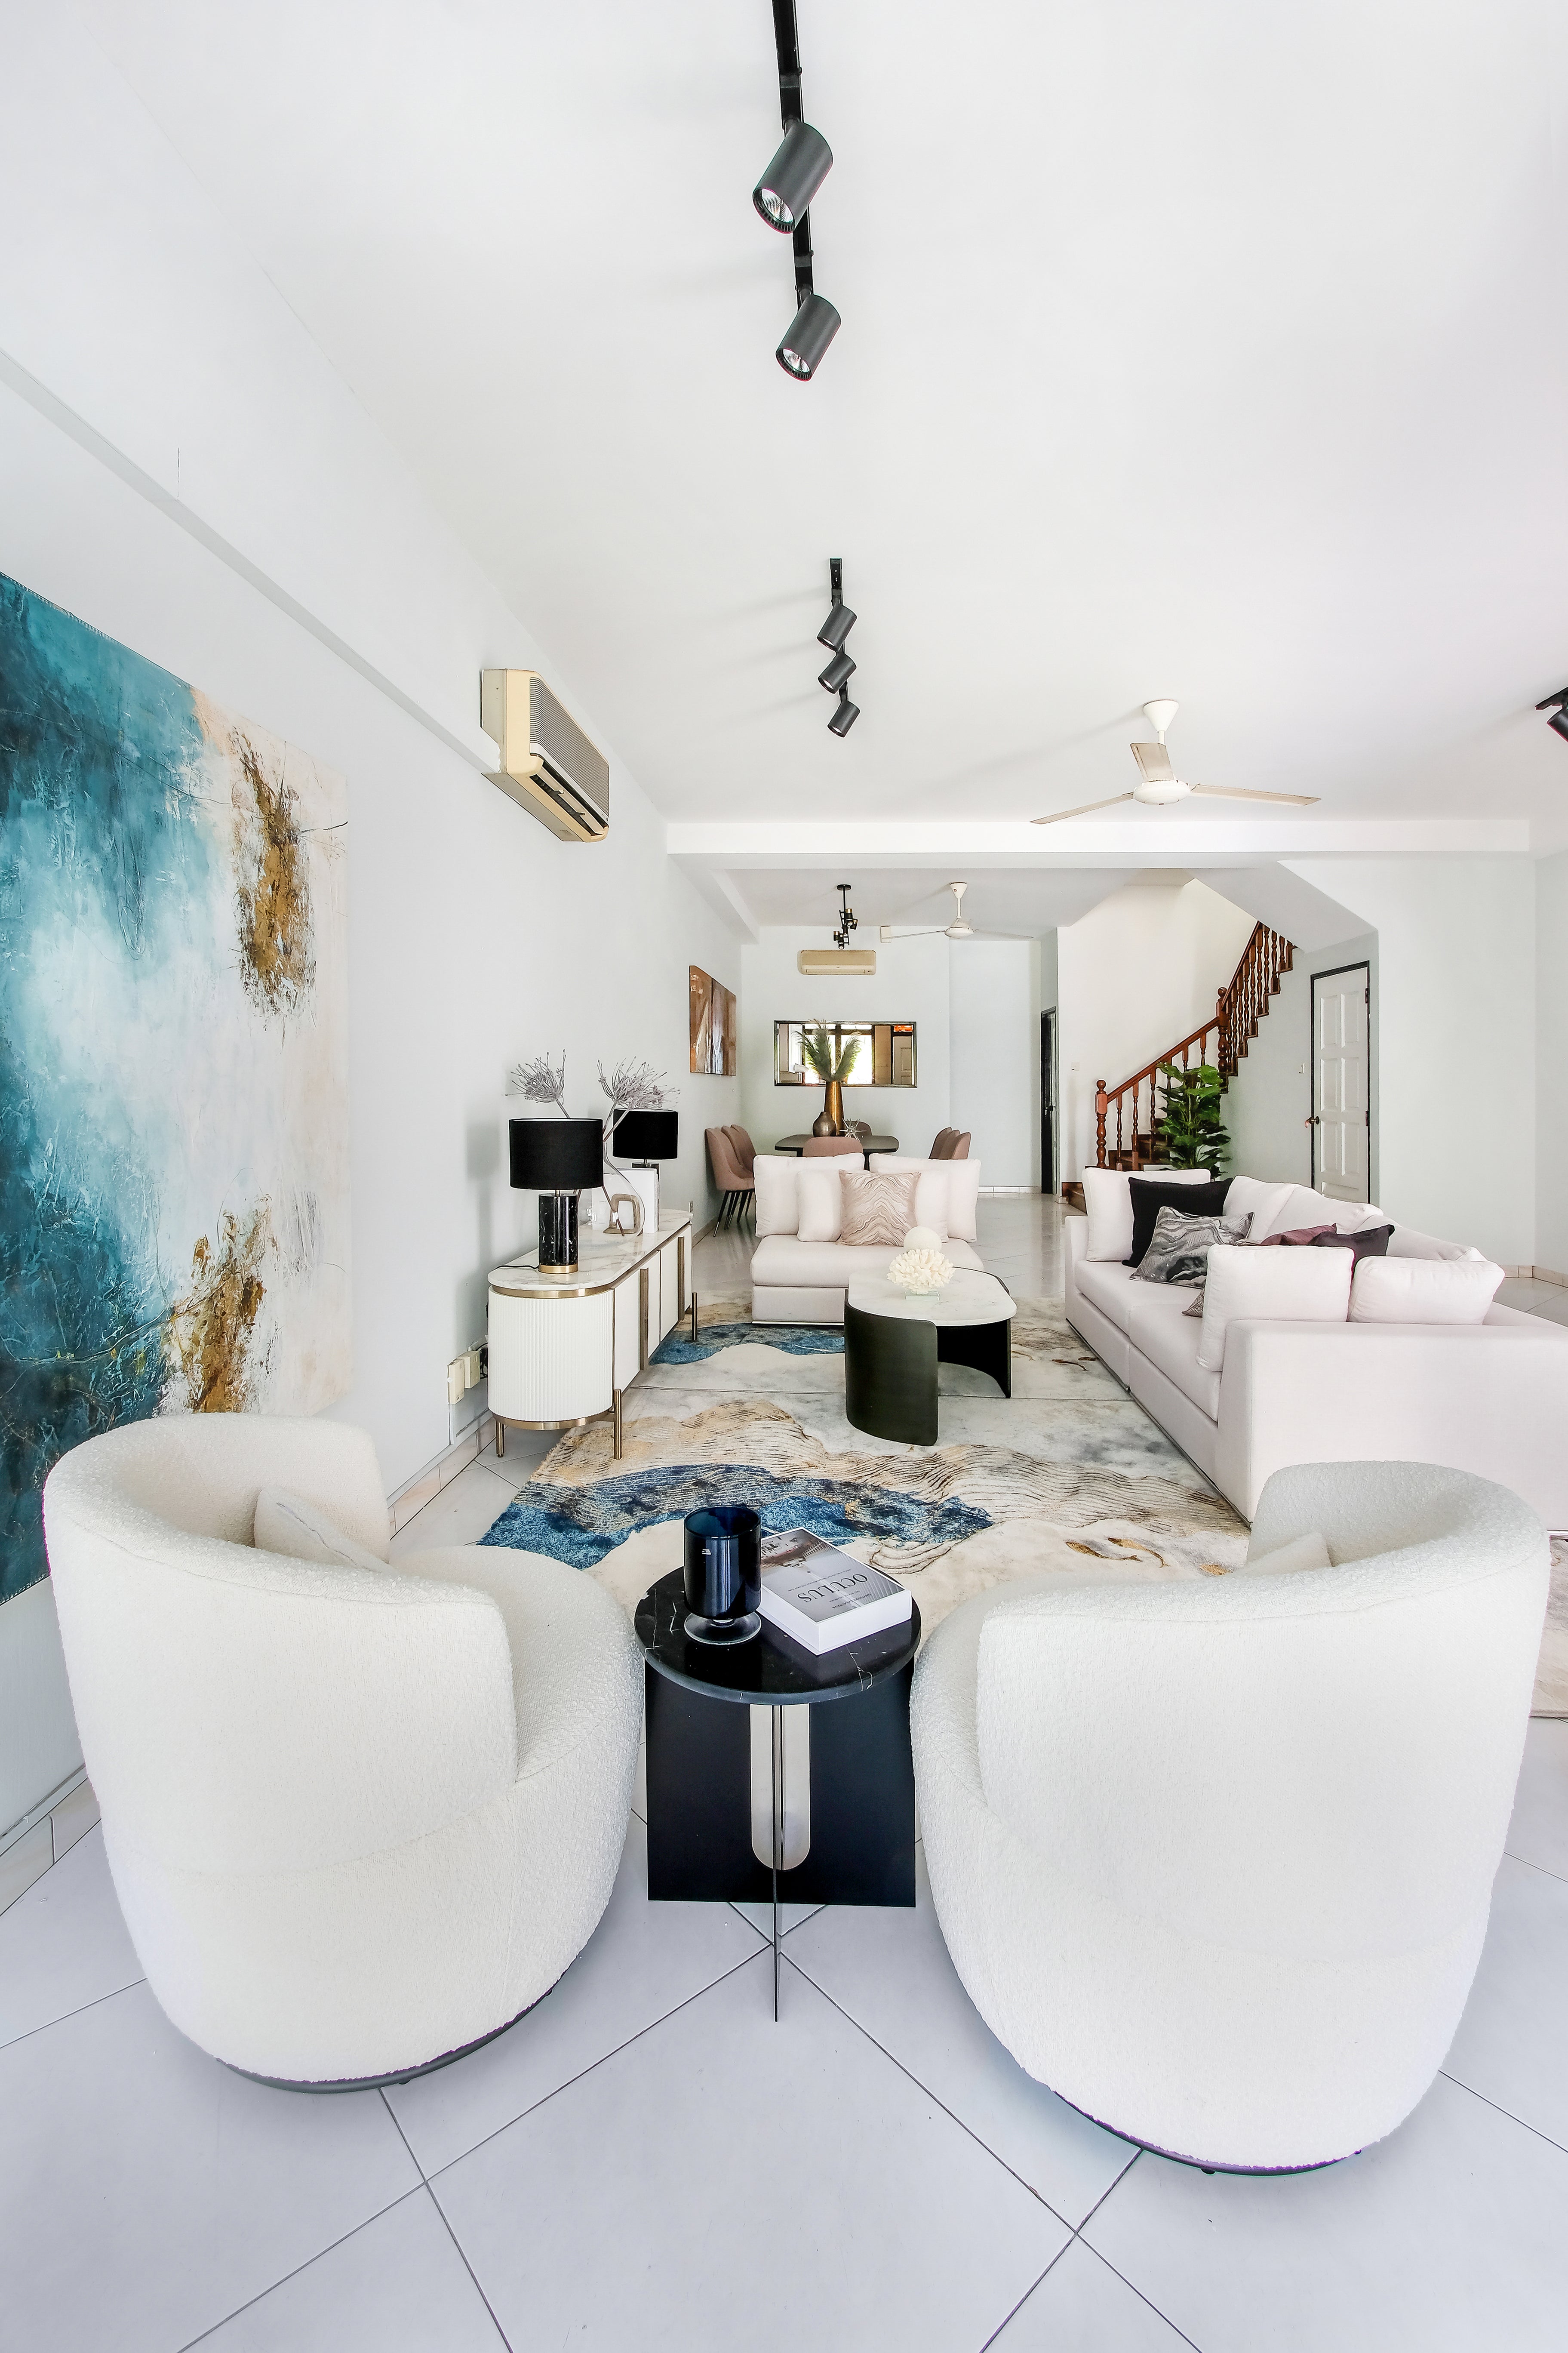 huggyhomey home staging the home everyone wants starke luxe allure theme singapore